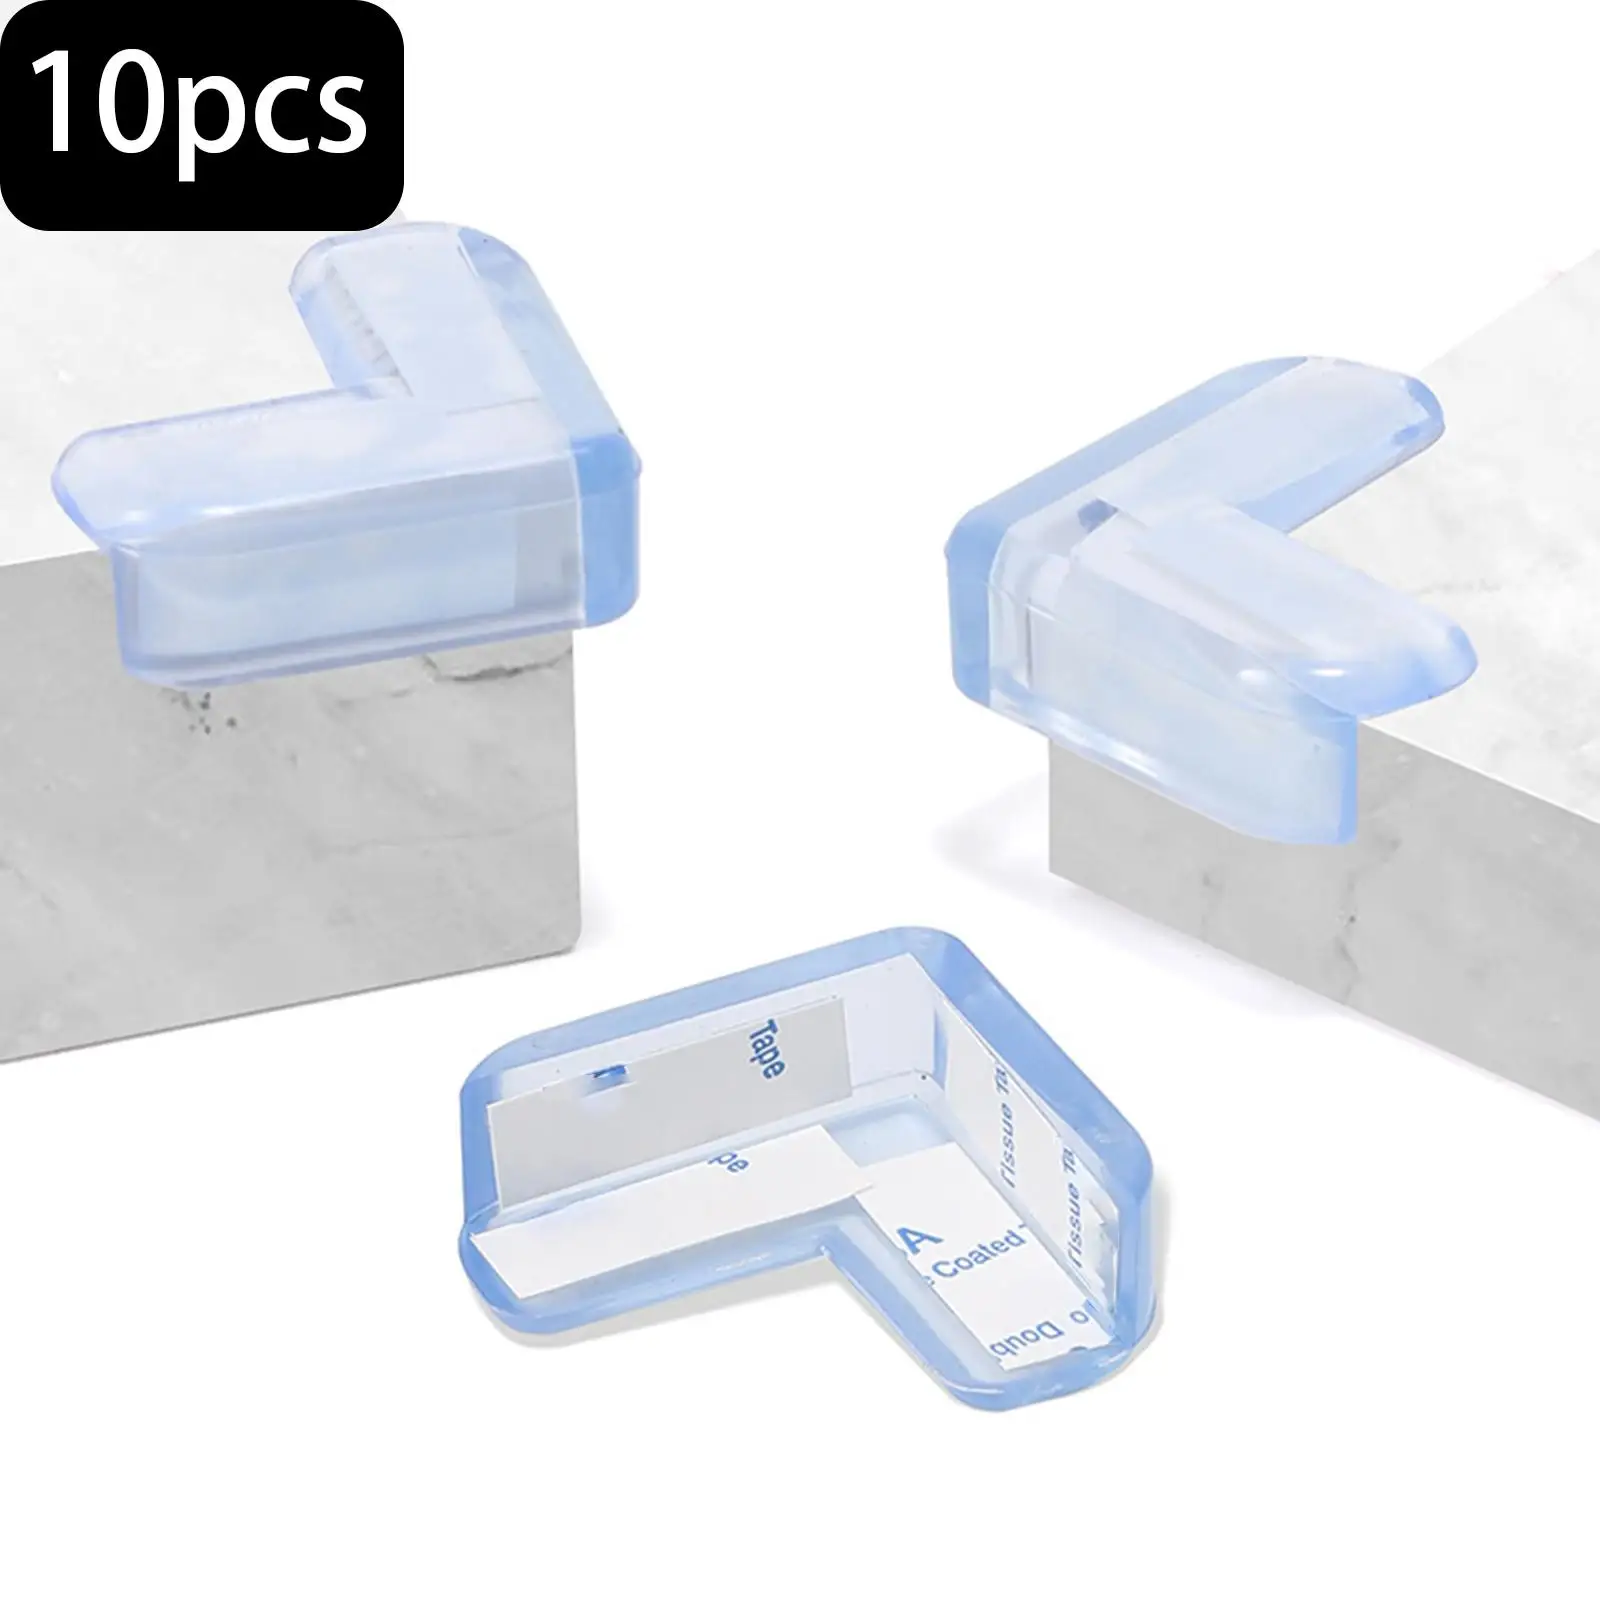 10 Pieces Table Corner Protector L Shaped Anti Collision  for Cupboard